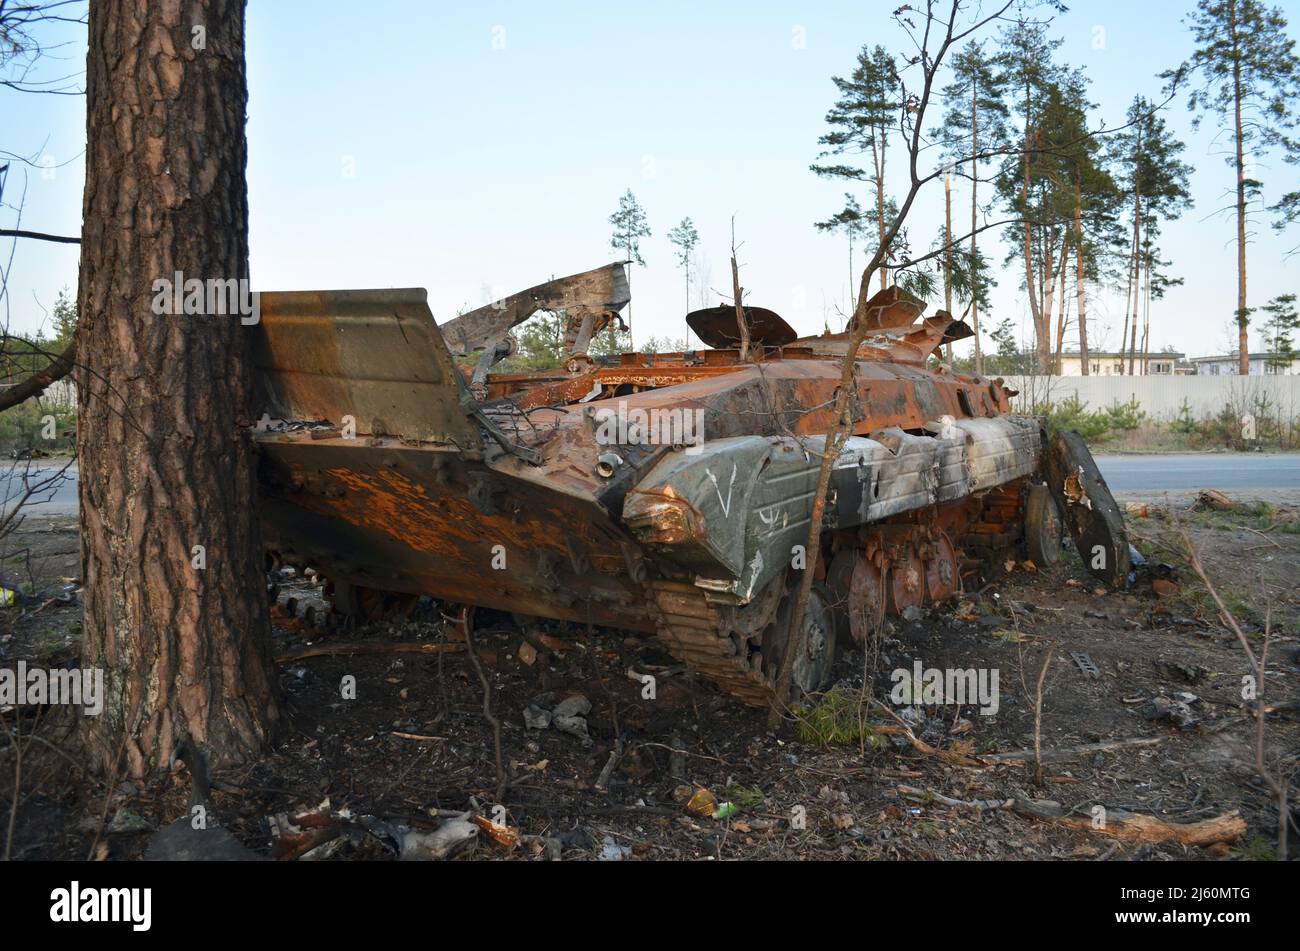 Dmytrivka village, Kyiv region, Ukraine - April 14, 2022: Destroyed infantry fighting vehicle with a white painting V of the Russian army. Stock Photo